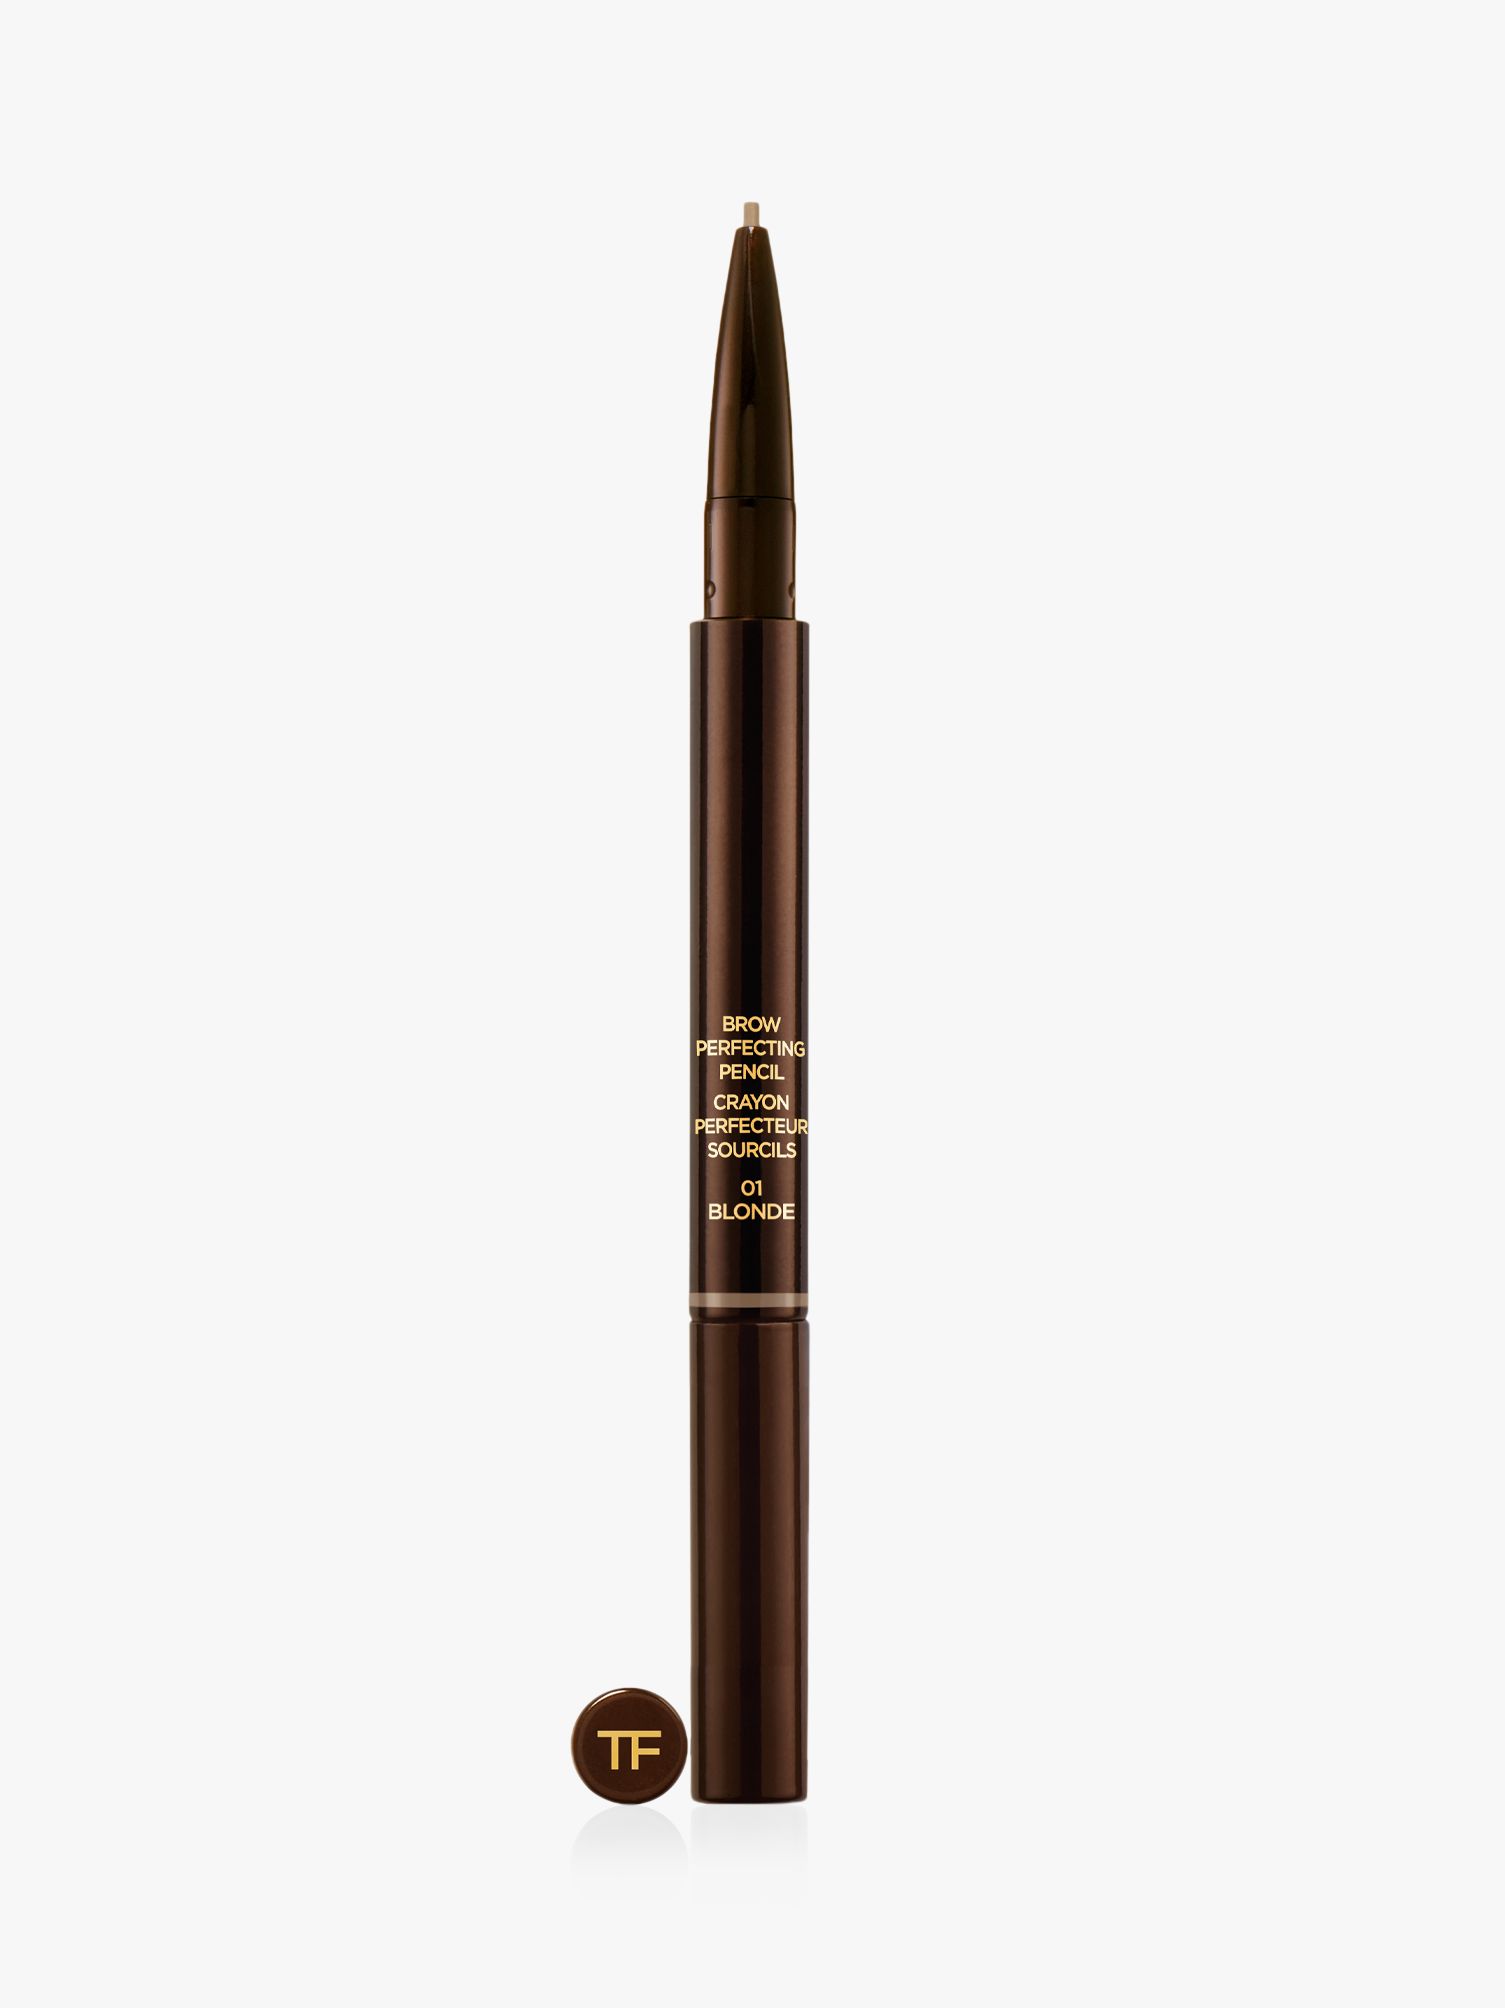 TOM FORD Brow Perfecting Pencil, 01 Blonde at John Lewis & Partners